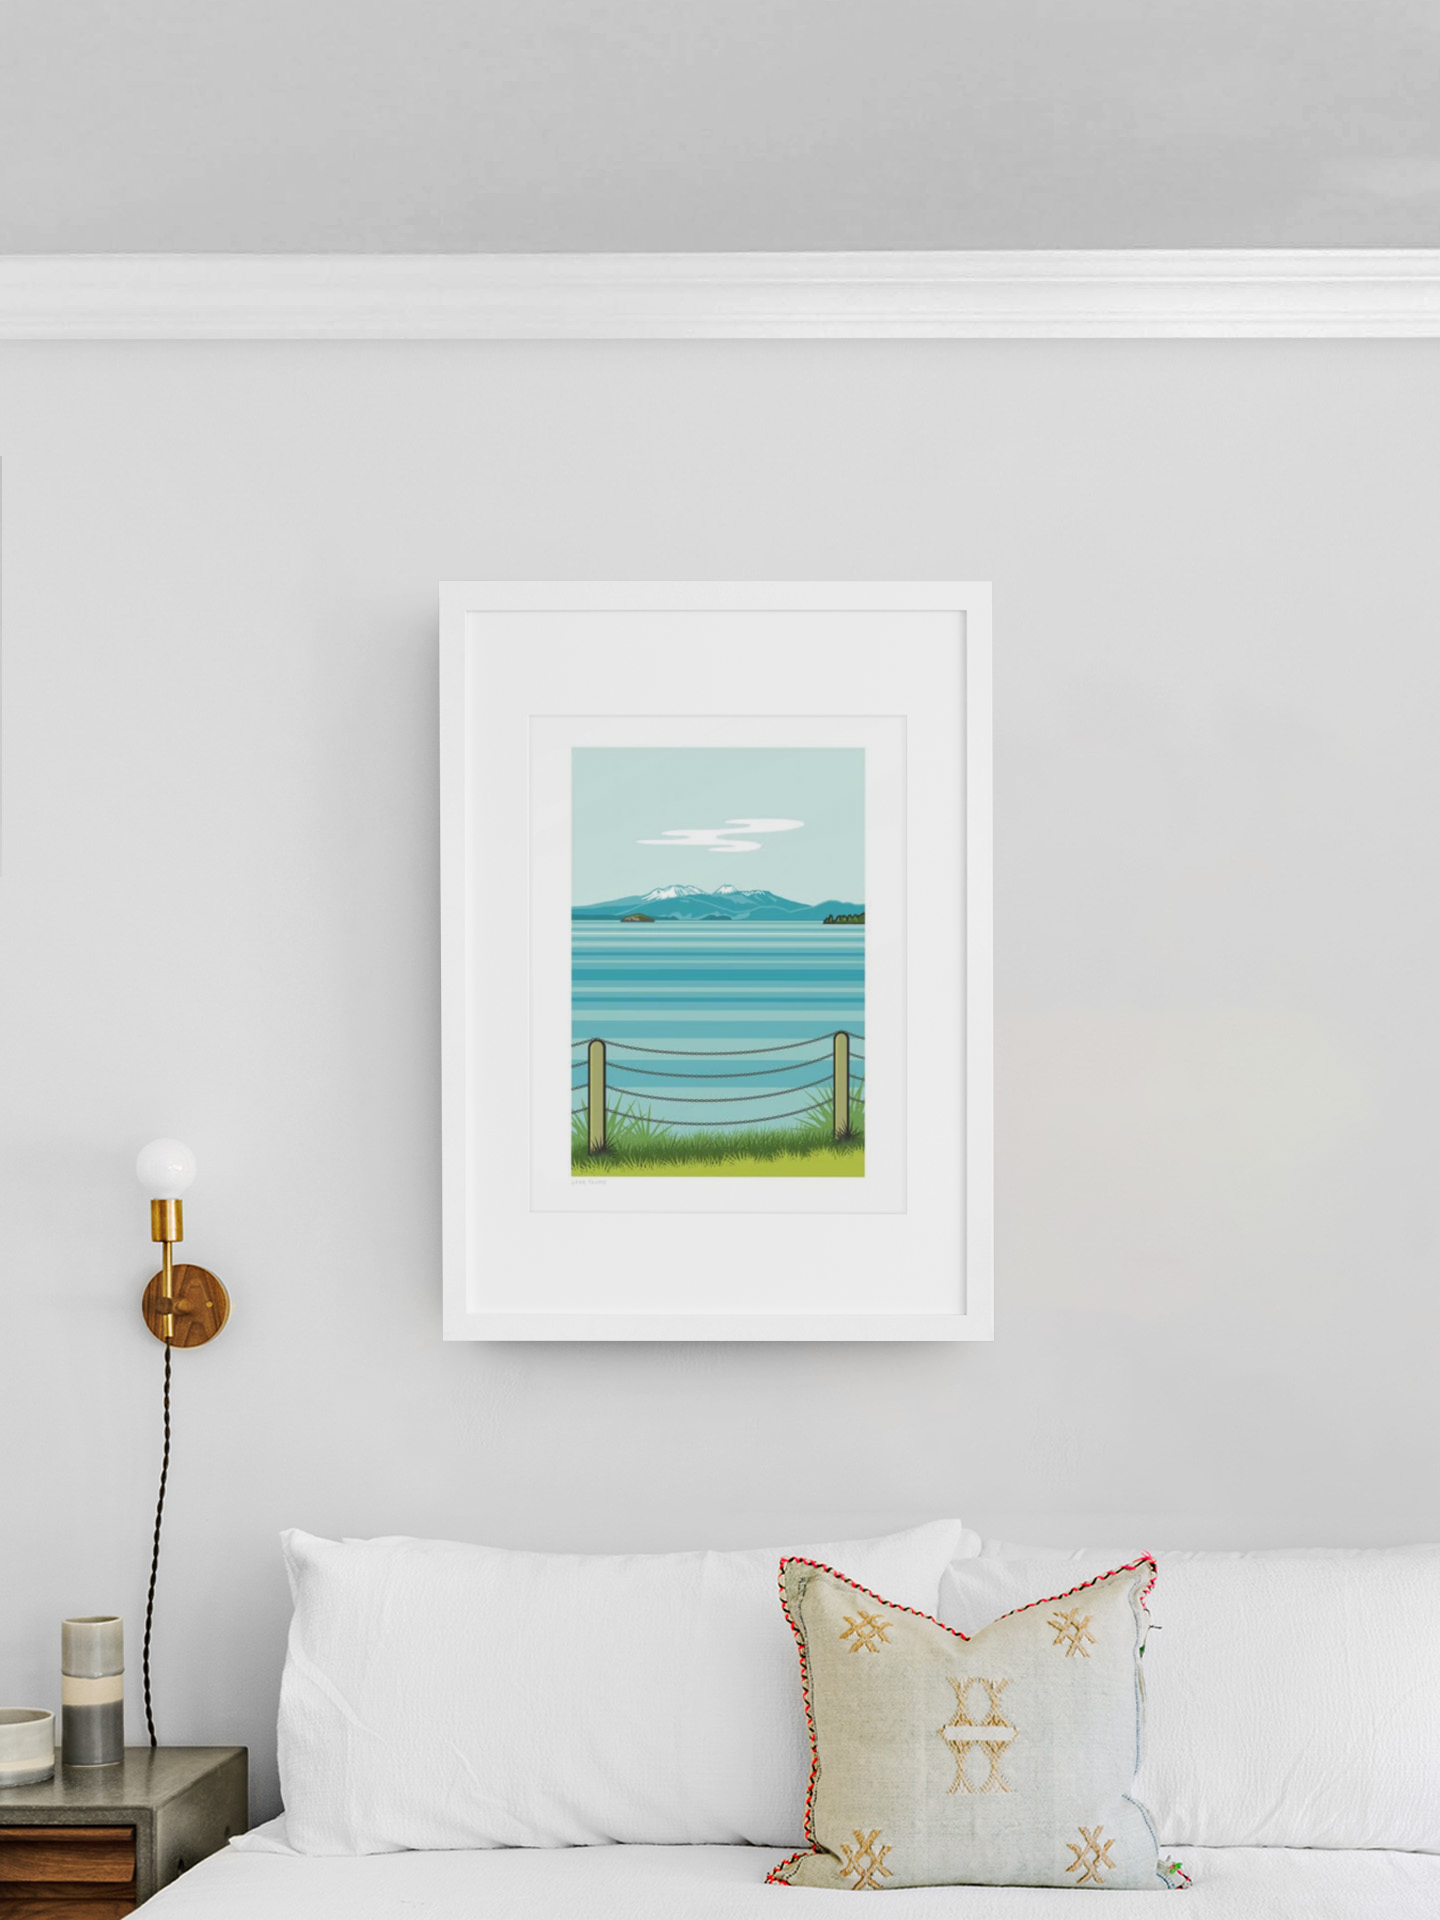 A serene Lake Taupo painting from Glenn Jones' Scenic Series in a white frame adorns a clean and modern living room wall, above a white couch with an elegantly patterned cushion.